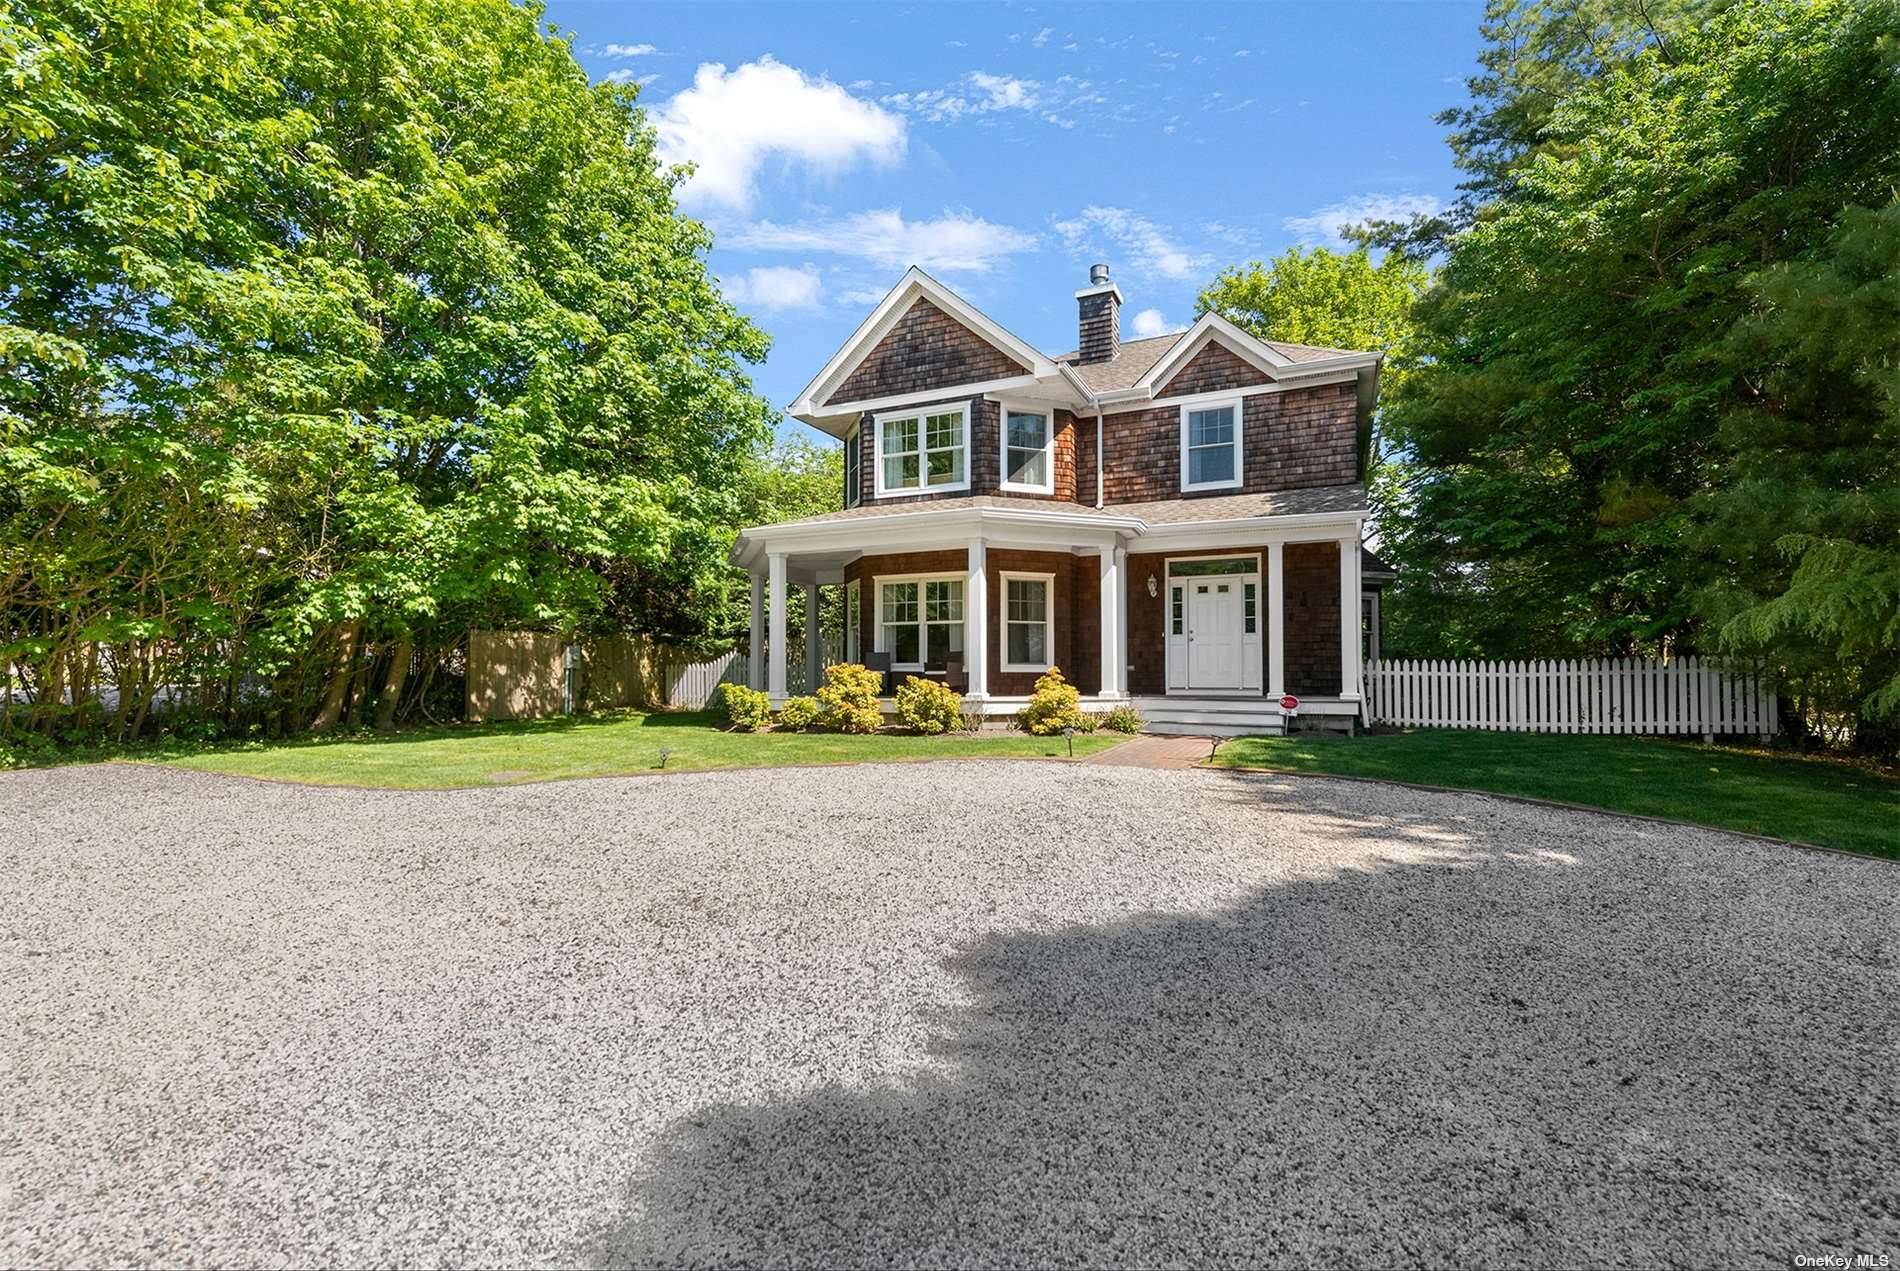 This ideally located farmhouse style home is a stone's throw from East Hampton's North Main Street, and just minutes from village ocean beaches.